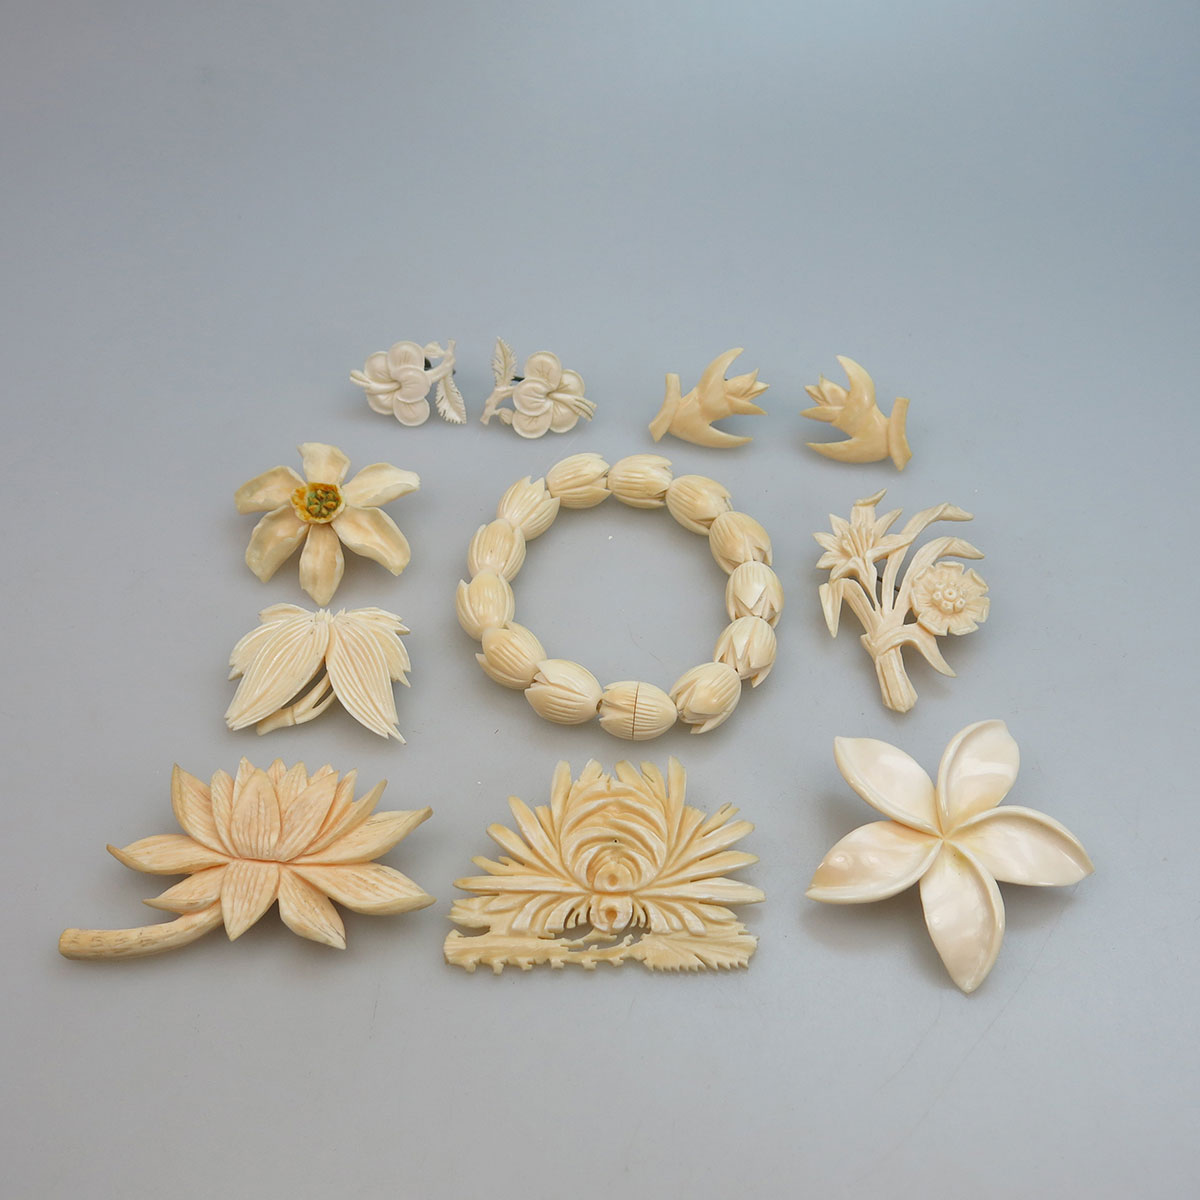 Small Quantity Of Carved Ivory Jewellery